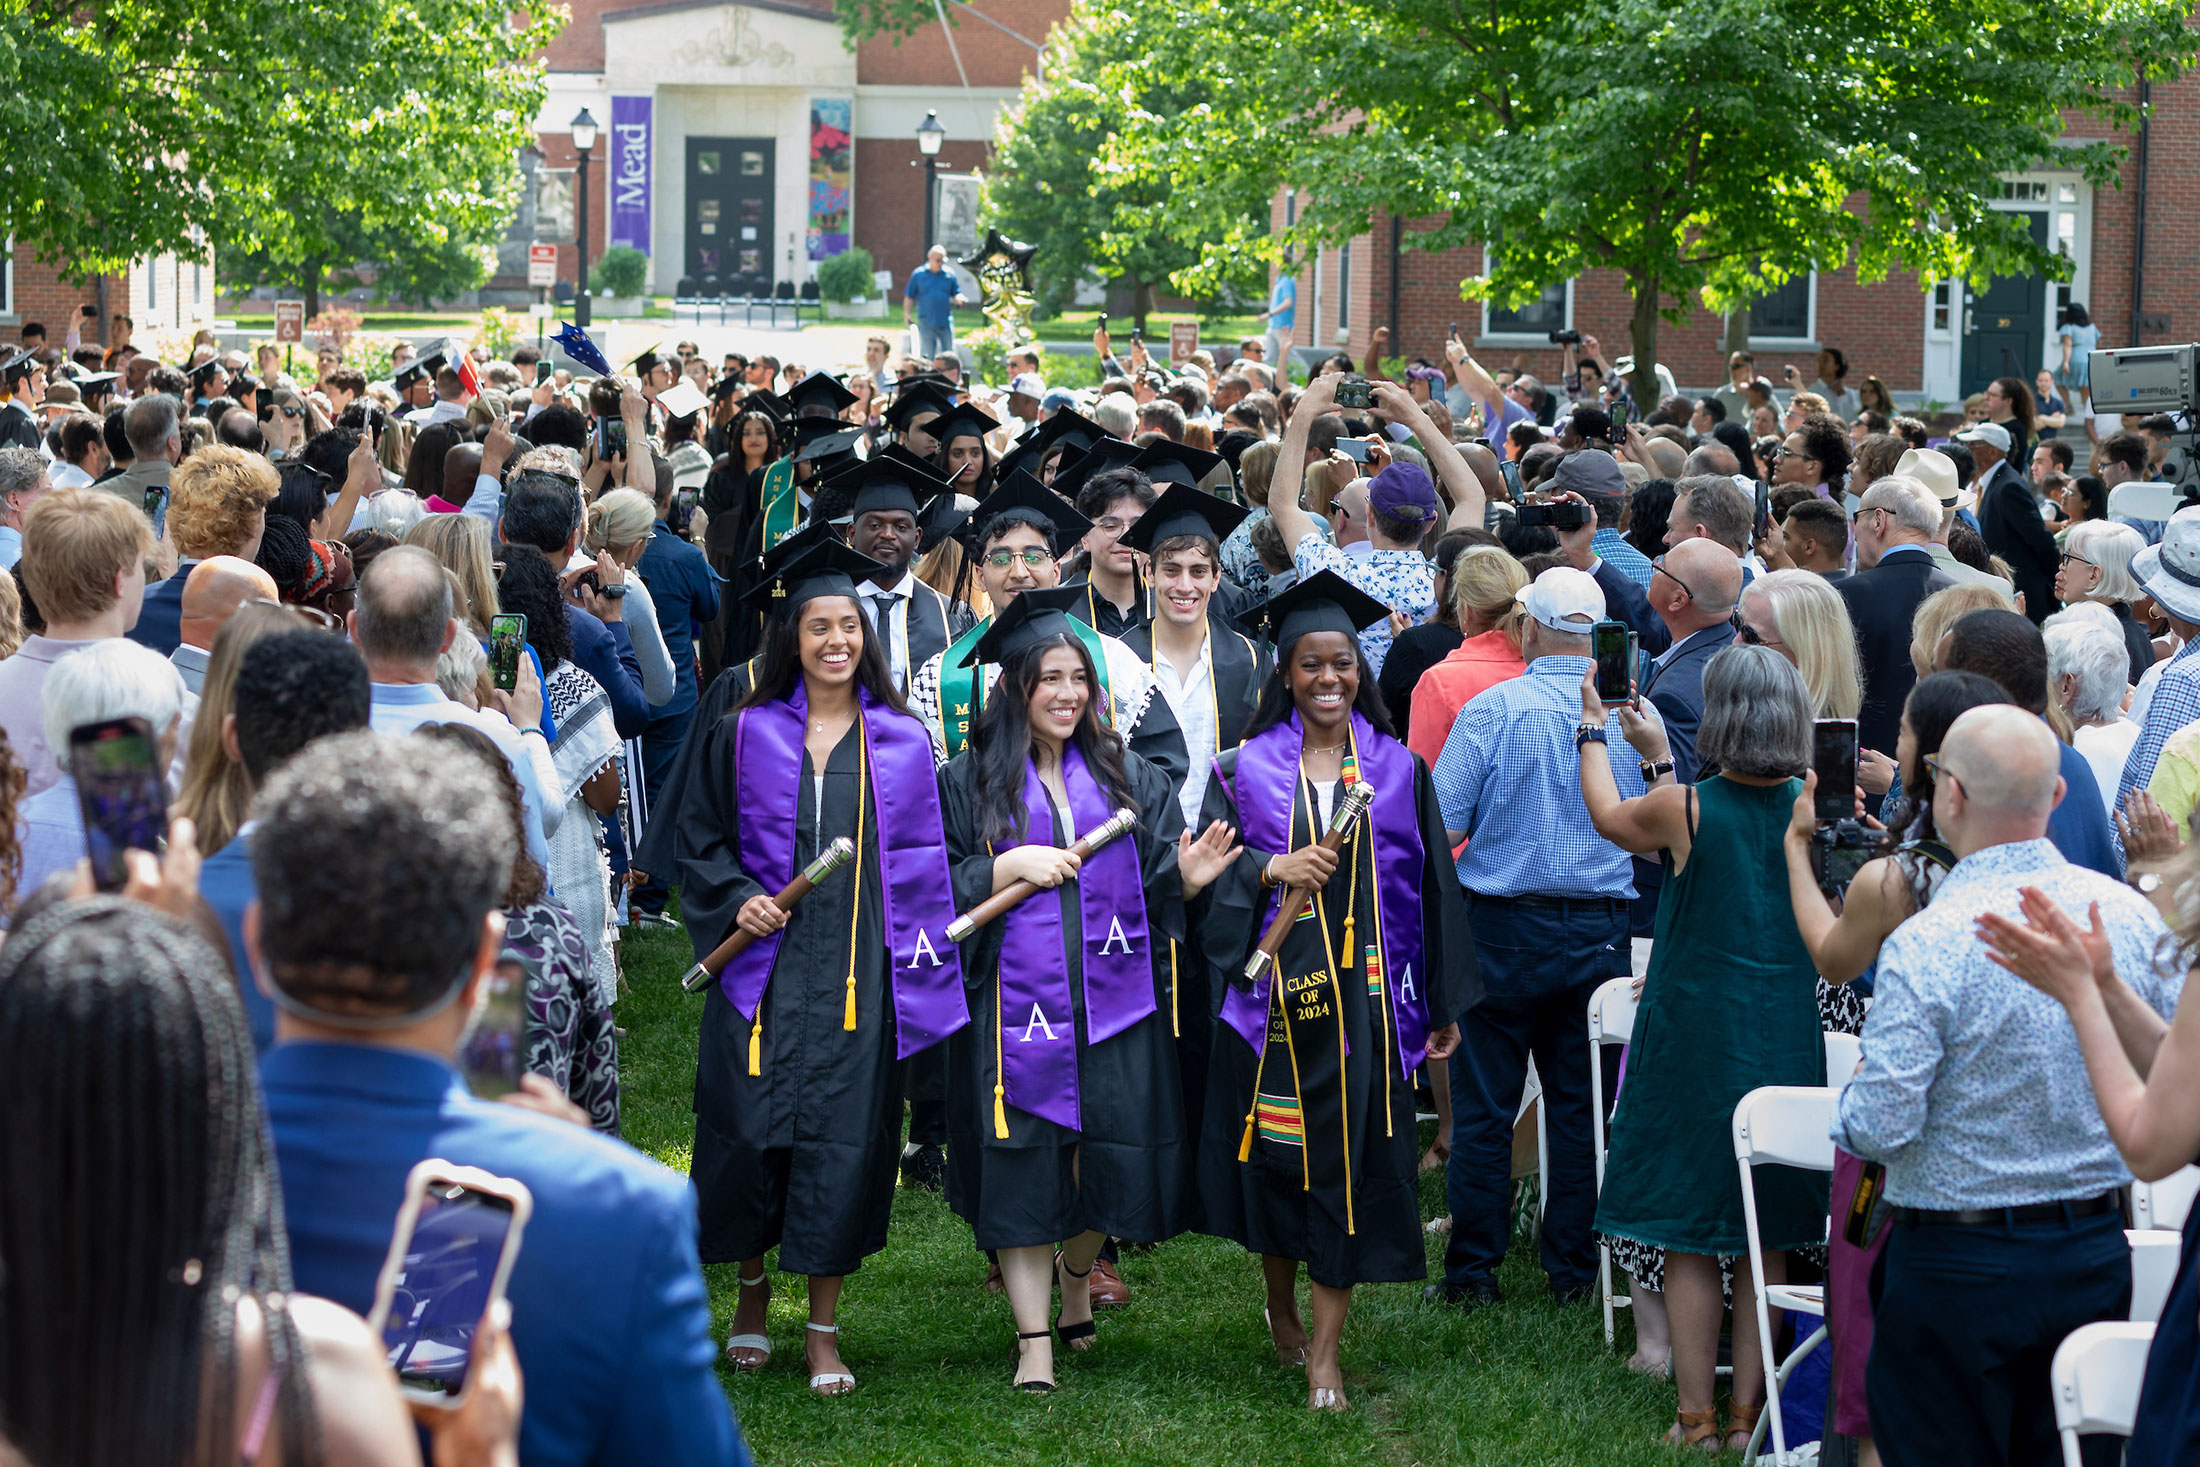 Three student marshals lead a procession of students through a crowd during commencement.